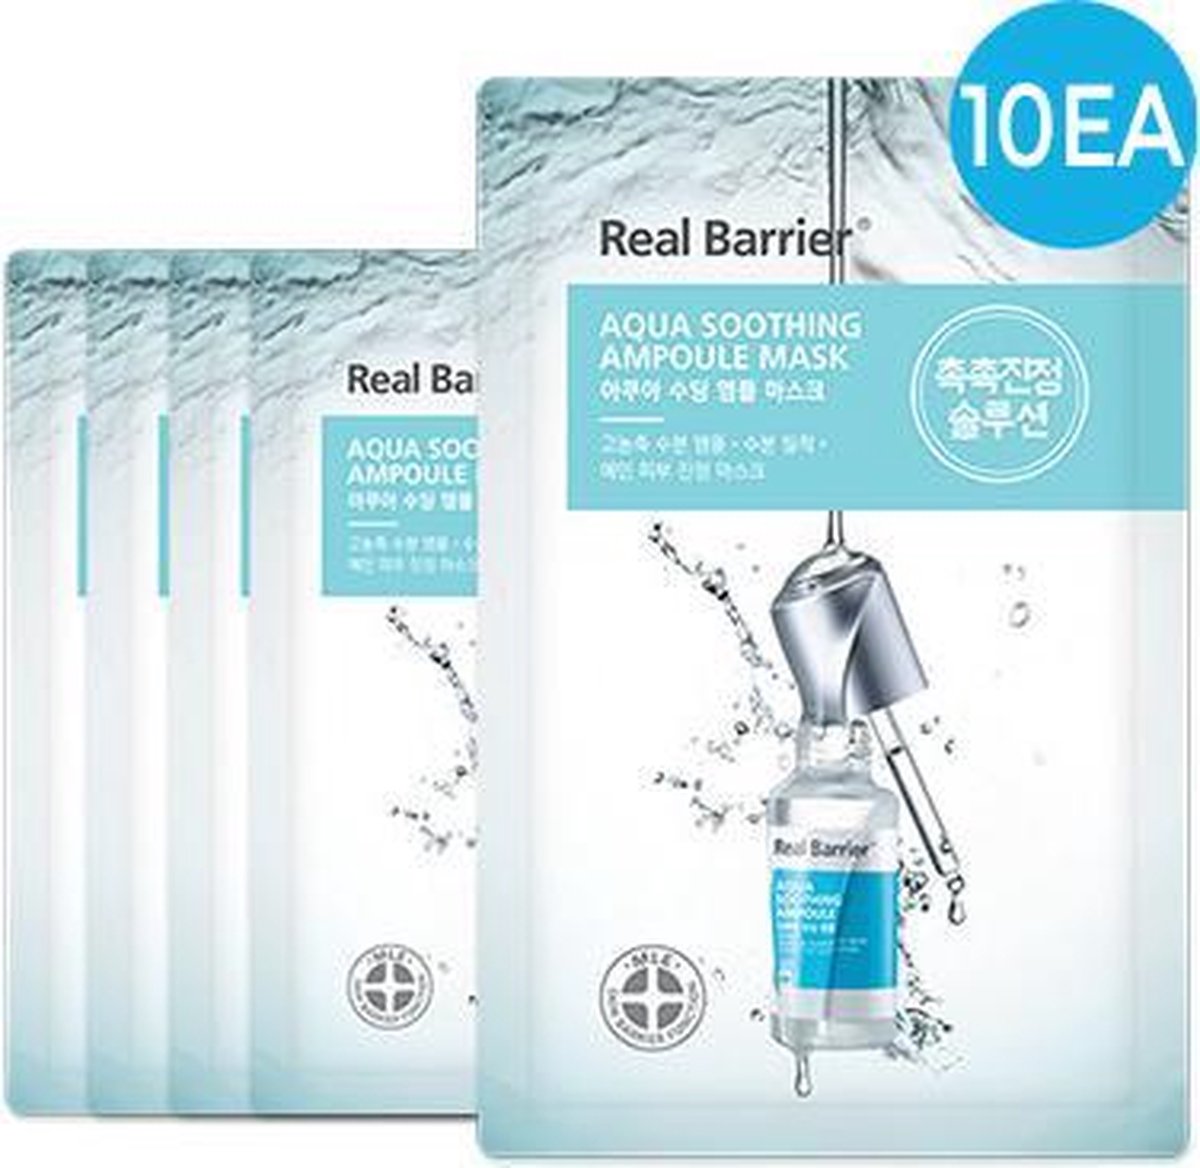 Real Barrier- Aqua Soothing Ampoule Mask-28ml 1 pc